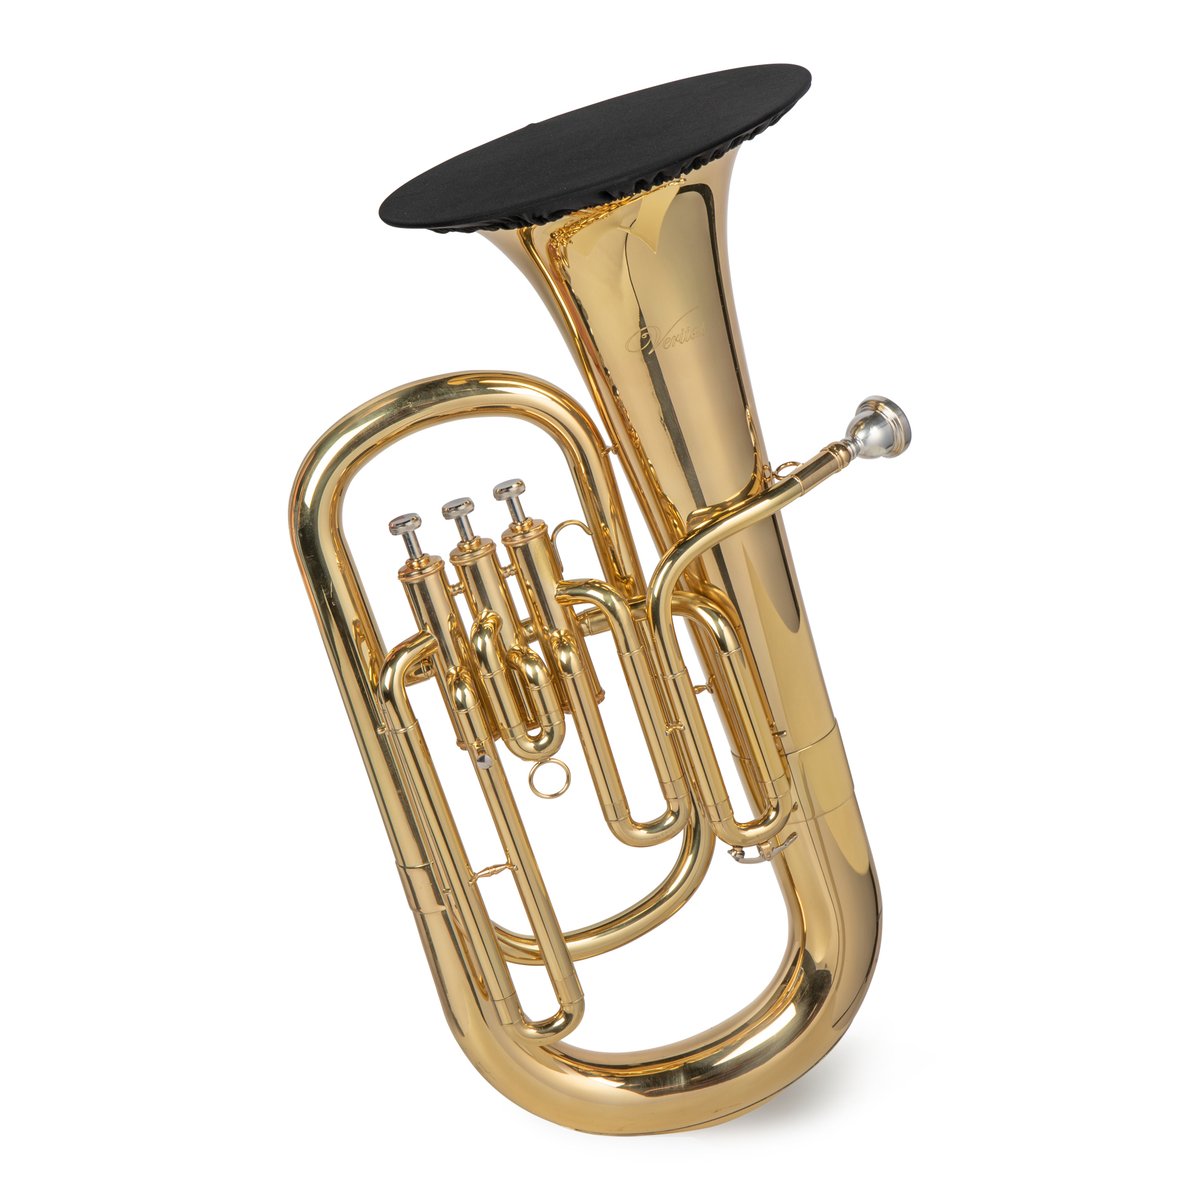 Double-Layer Wind Instrument Cover for Bell Sizes Ranging from 9 to 11-Inches (Black Color)